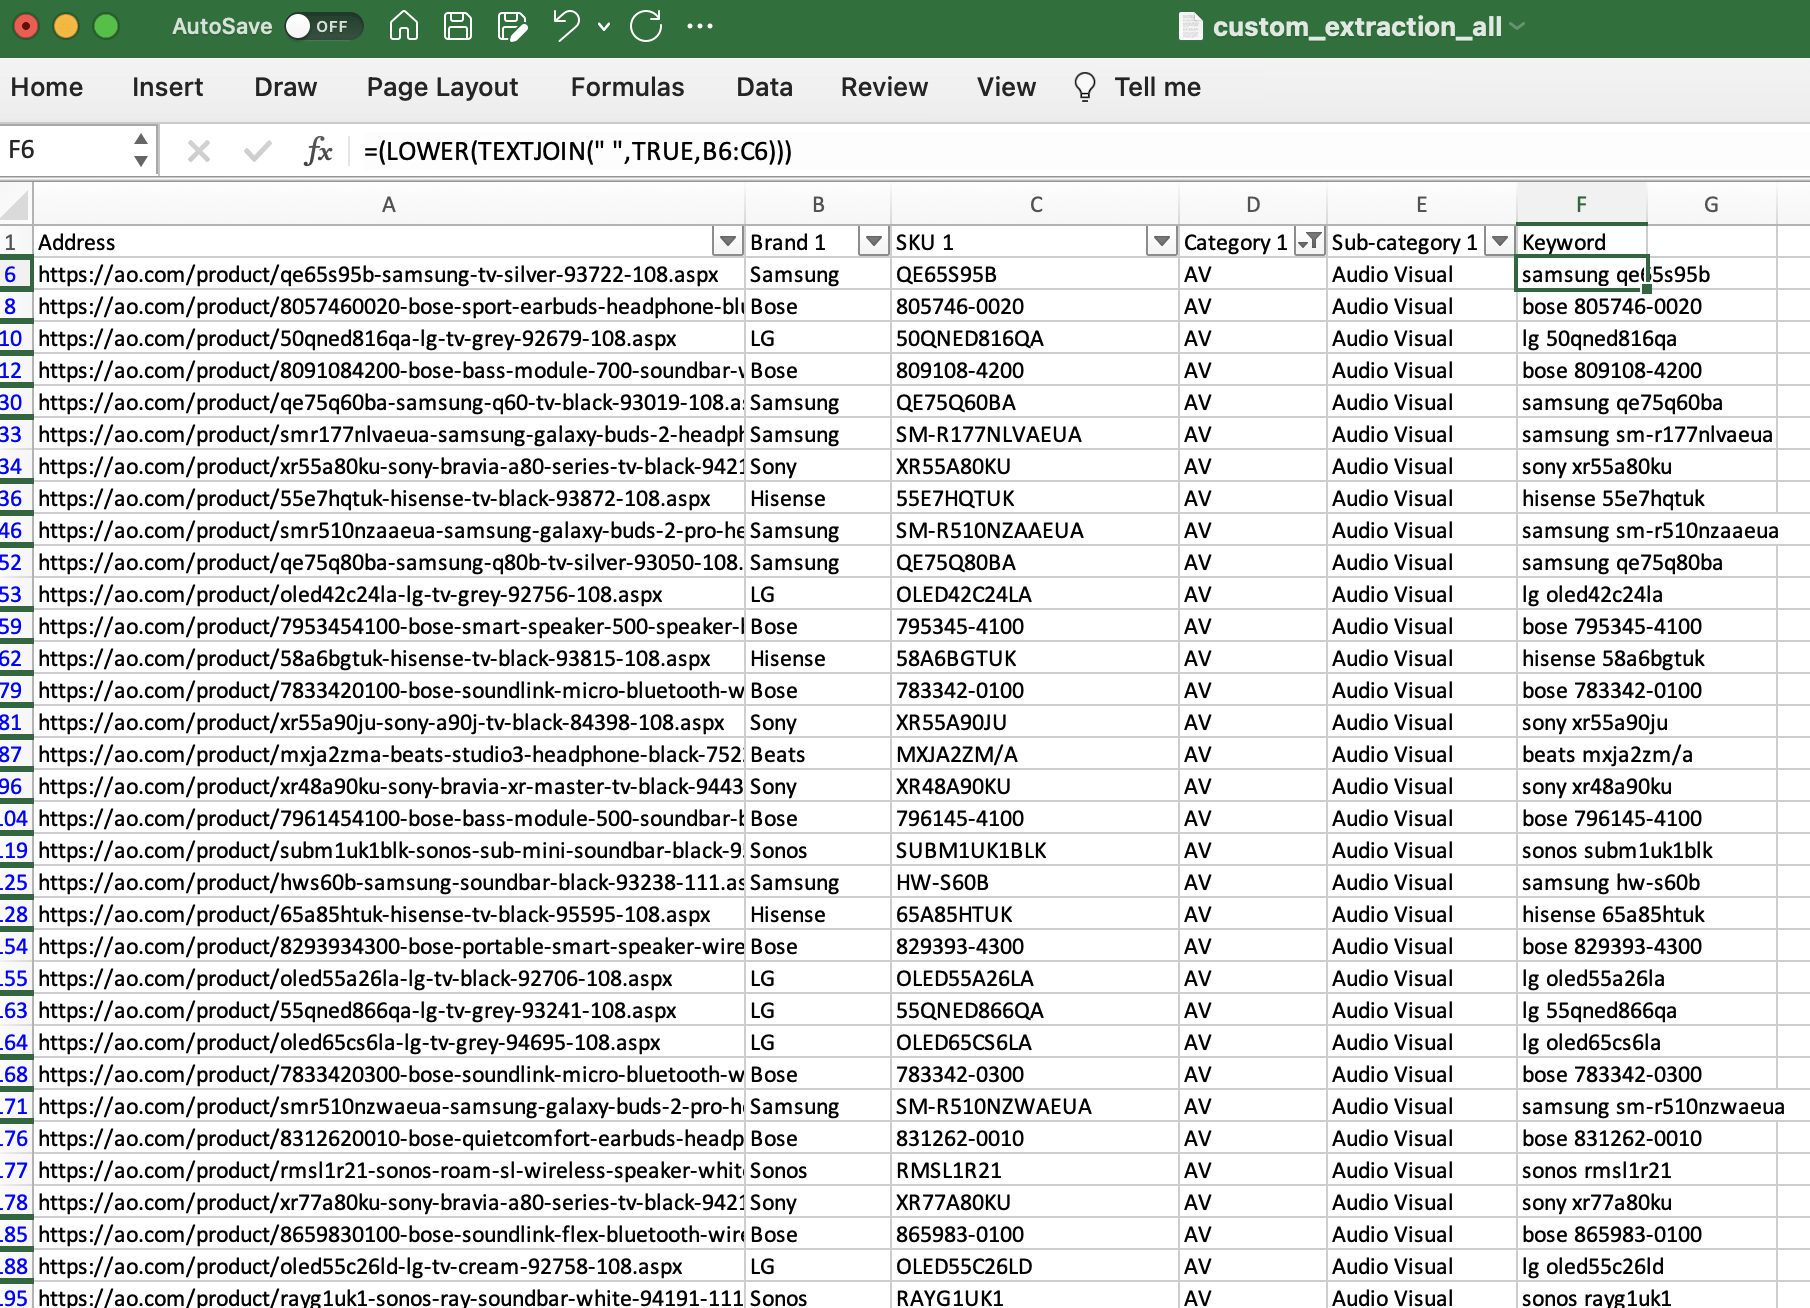 An Excel screenshot with AO product data